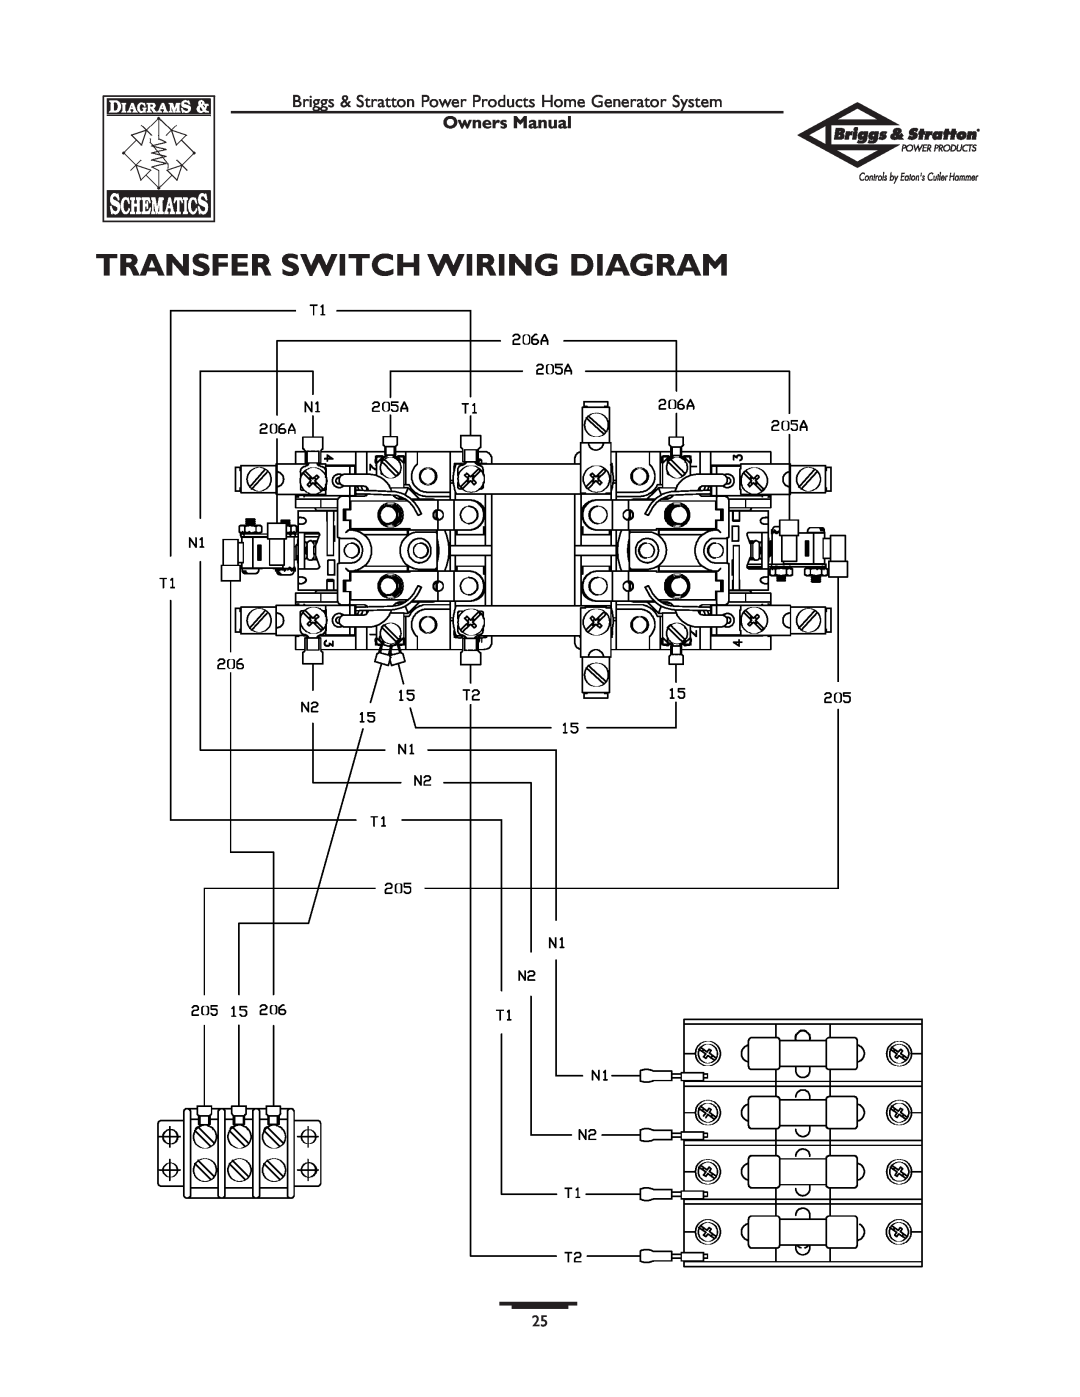 Briggs & Stratton 1679-0 owner manual Transfer Switch Wiring Diagram, Owners Manual 